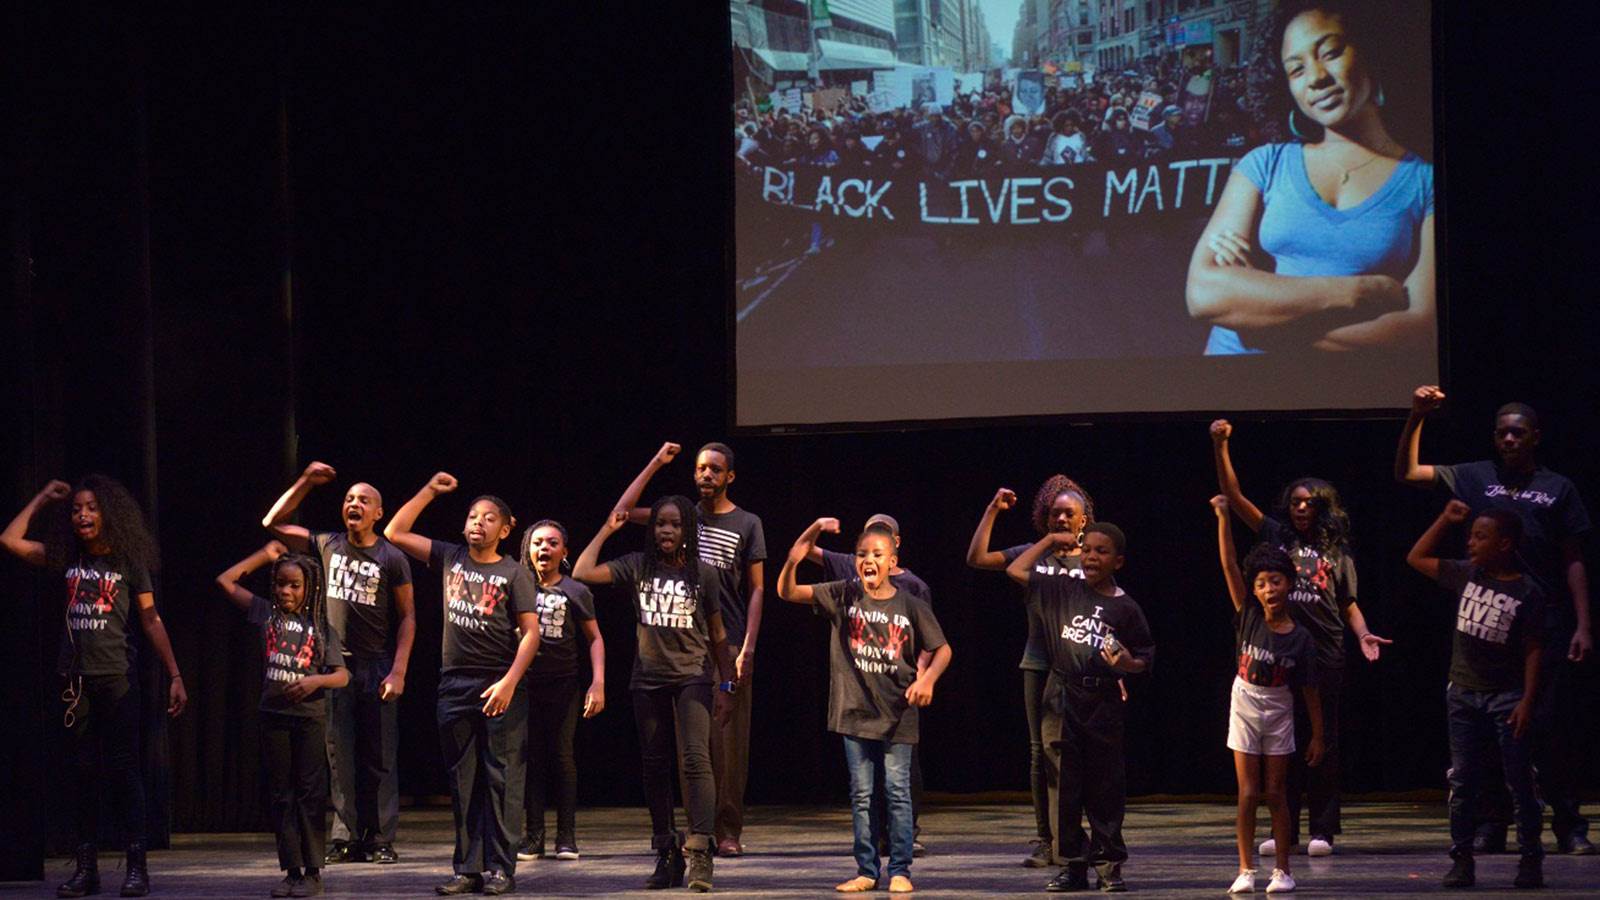 Many students standing on a stage, wearing black t-shirts. There is a projection in the background with a women crossing her arms and text next to her saying "Black Lives Matter"